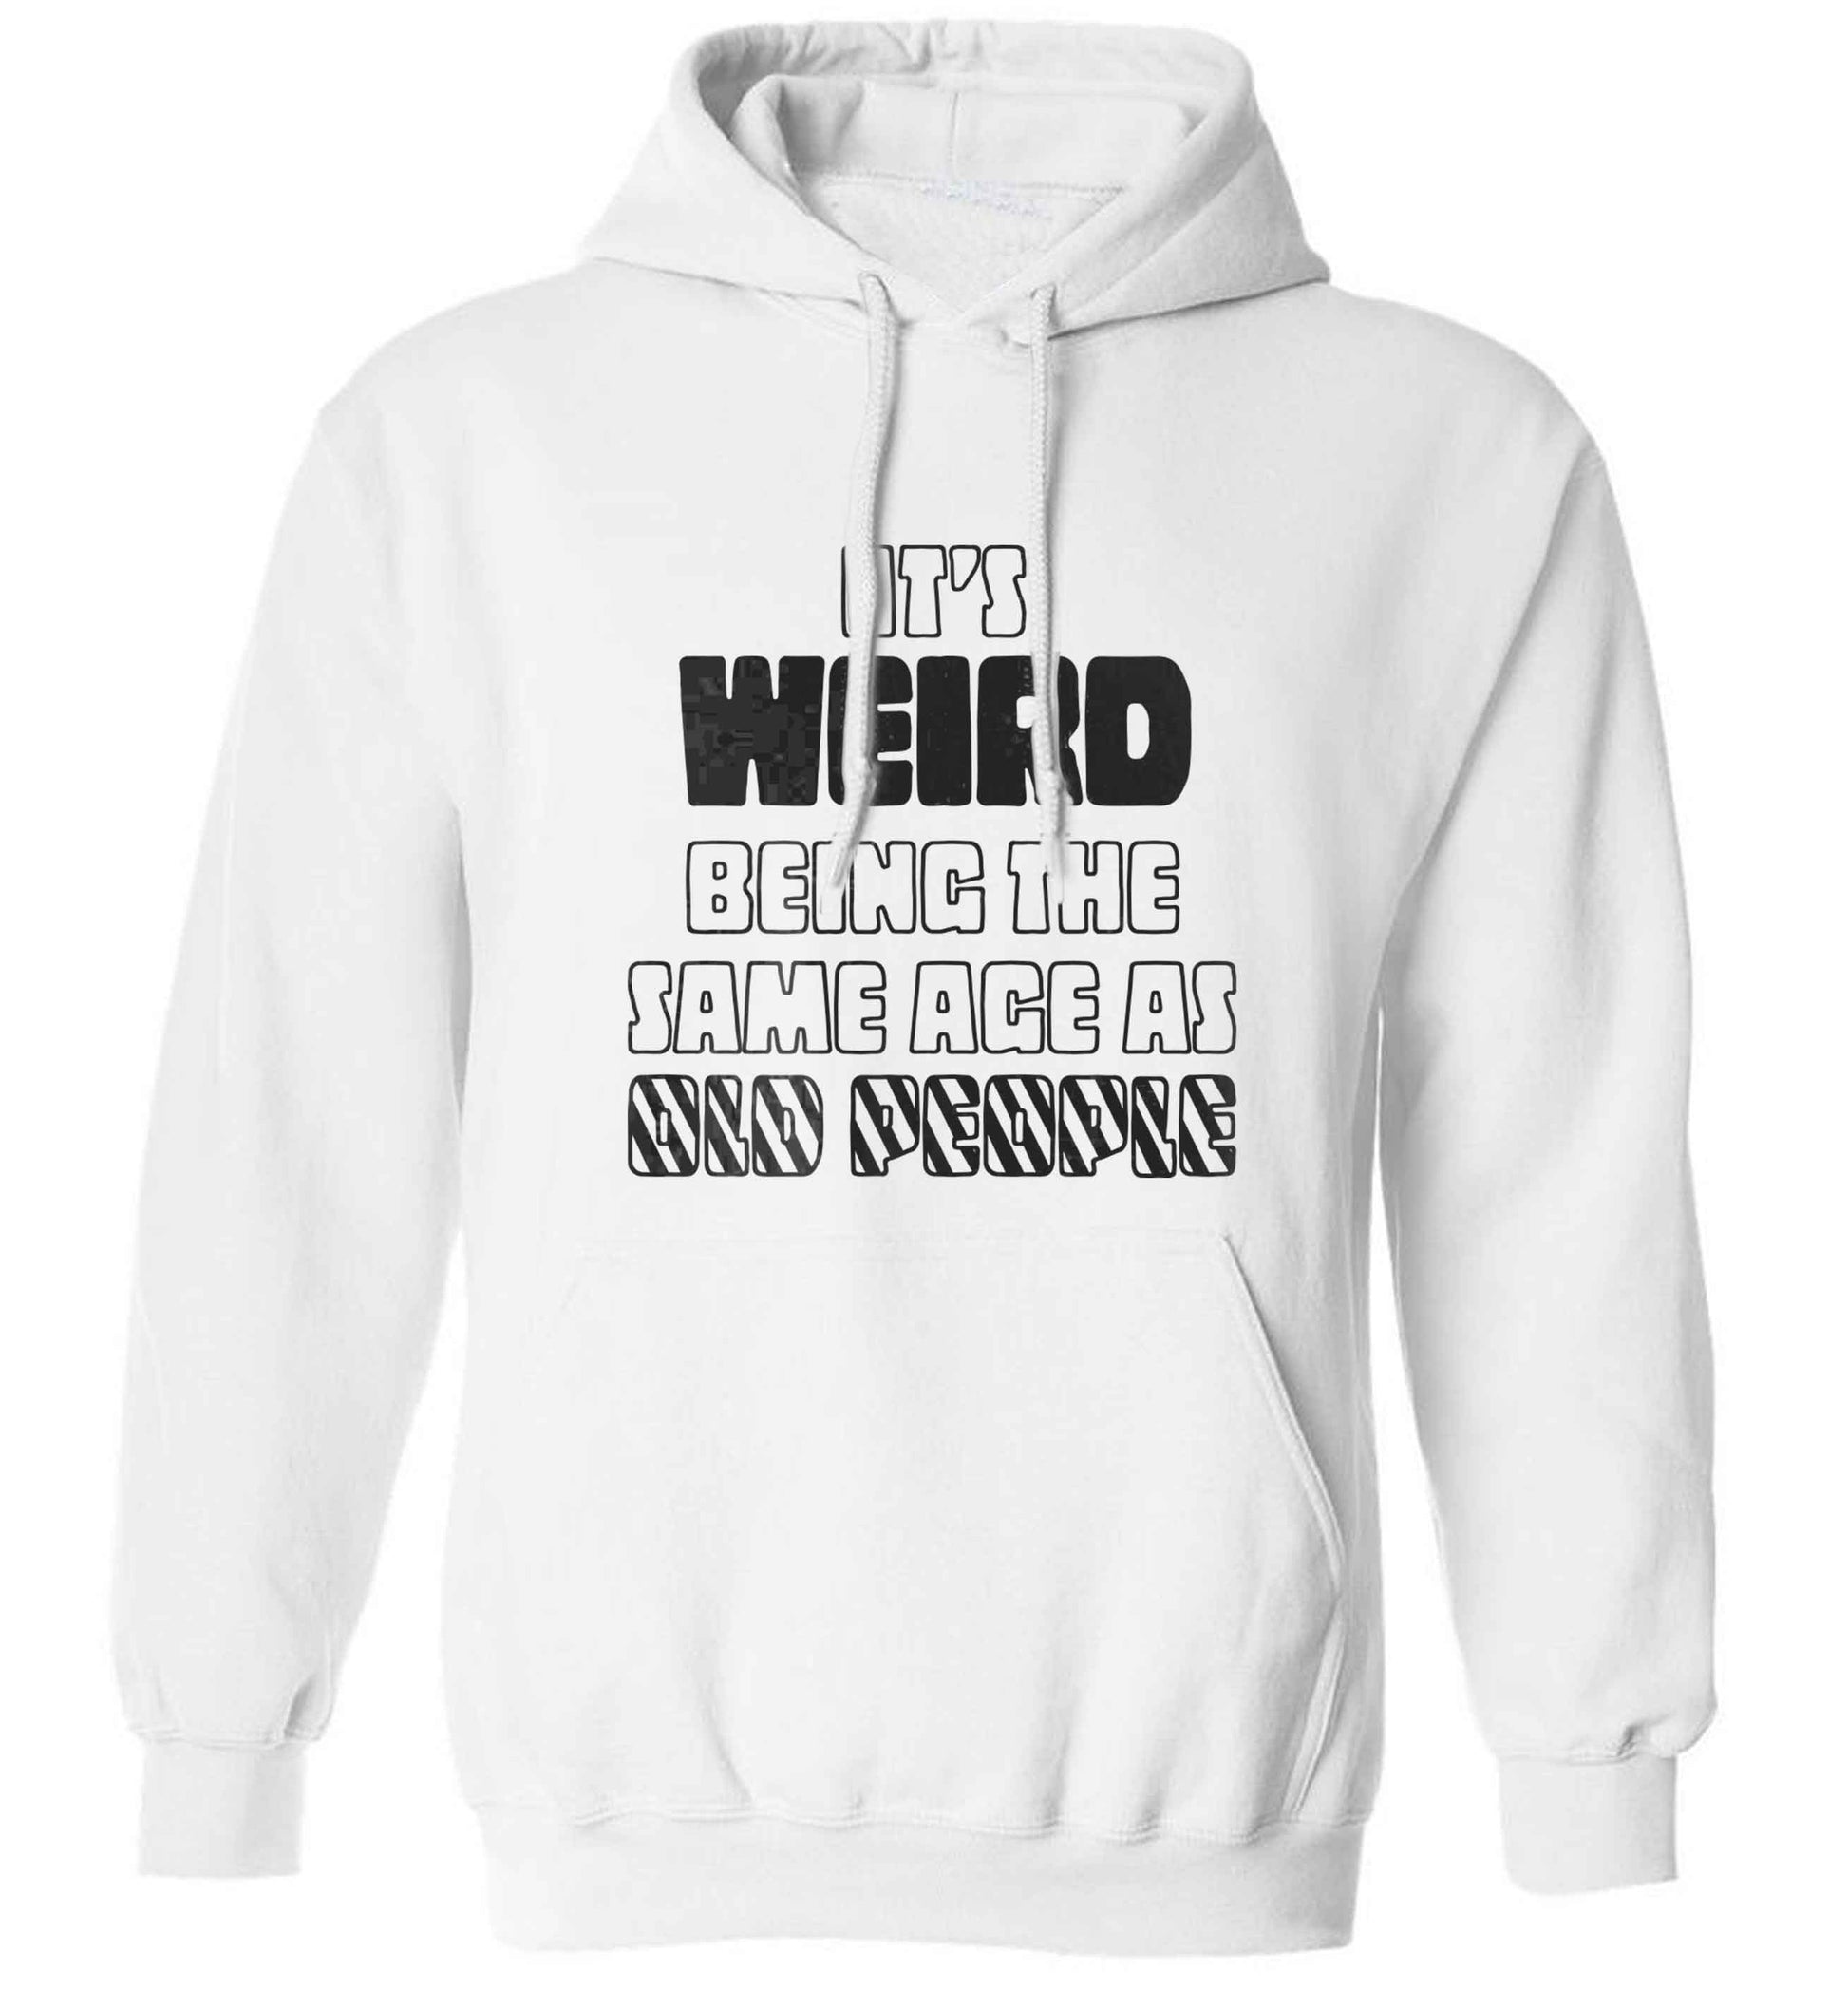 It's weird being the same age as old people adults unisex white hoodie 2XL